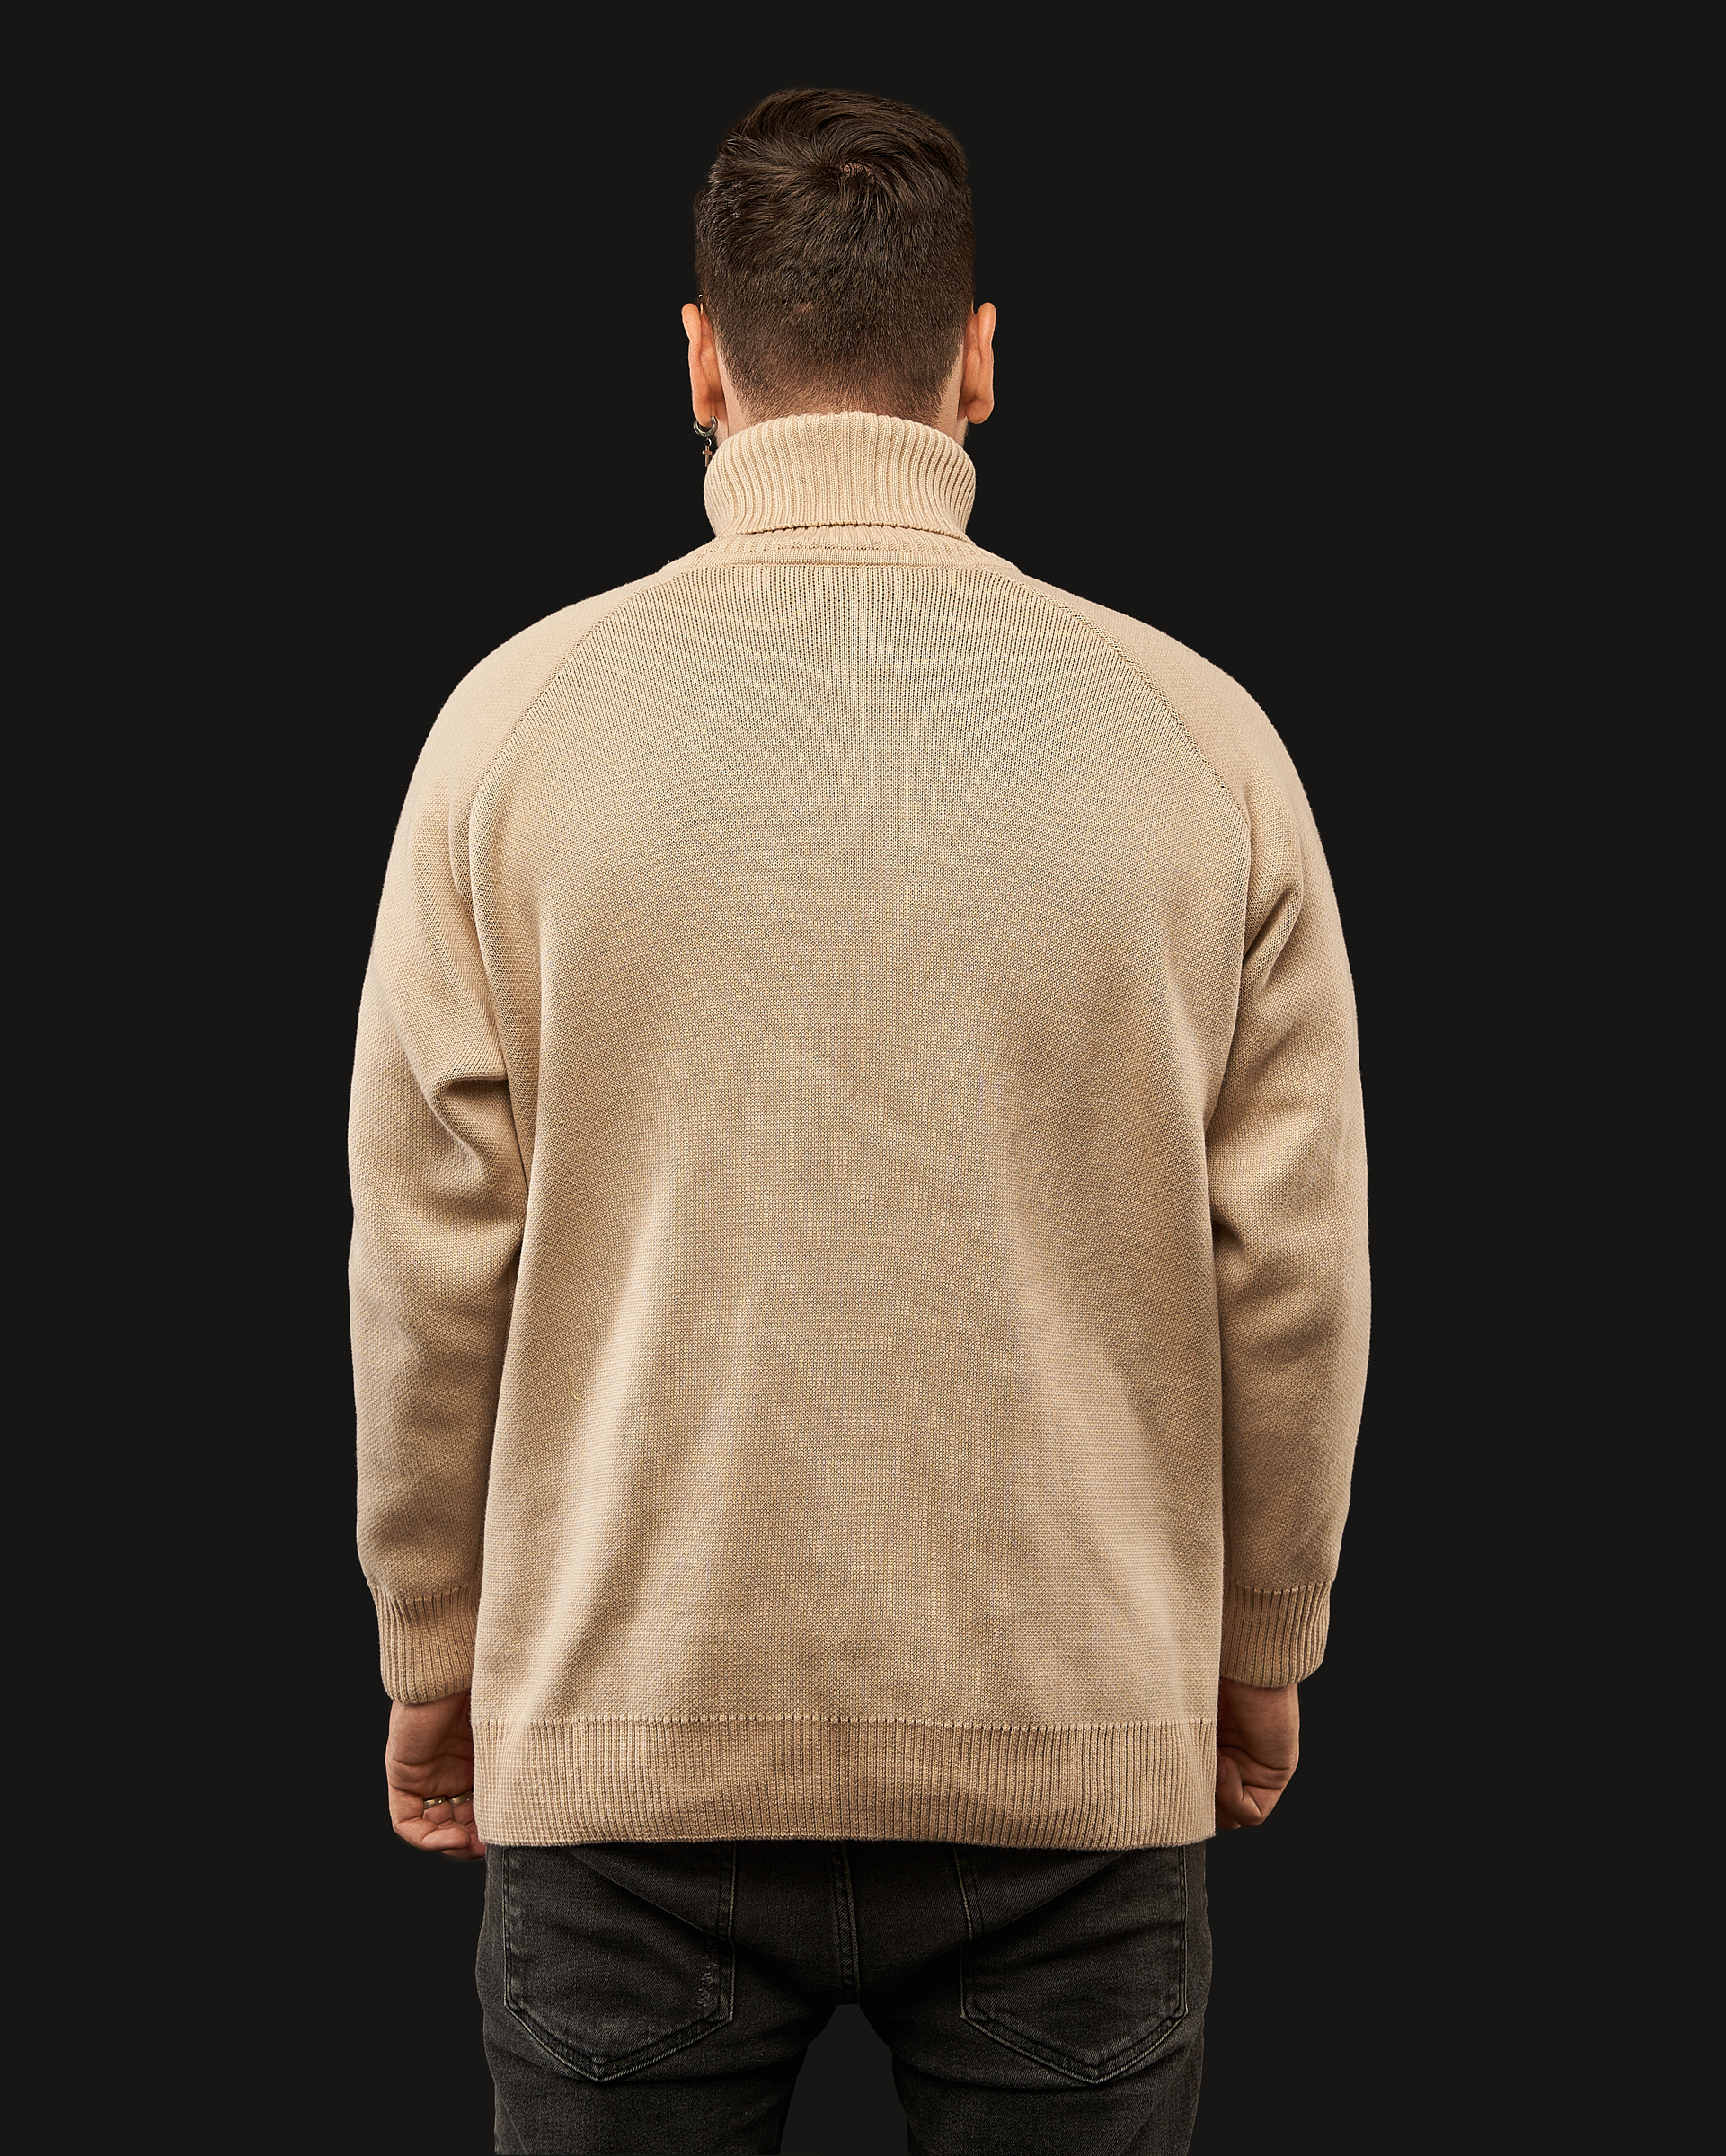 Pullover (beige) Image: https://ohueno-official.com/wp-content/uploads/m01950-1.jpg